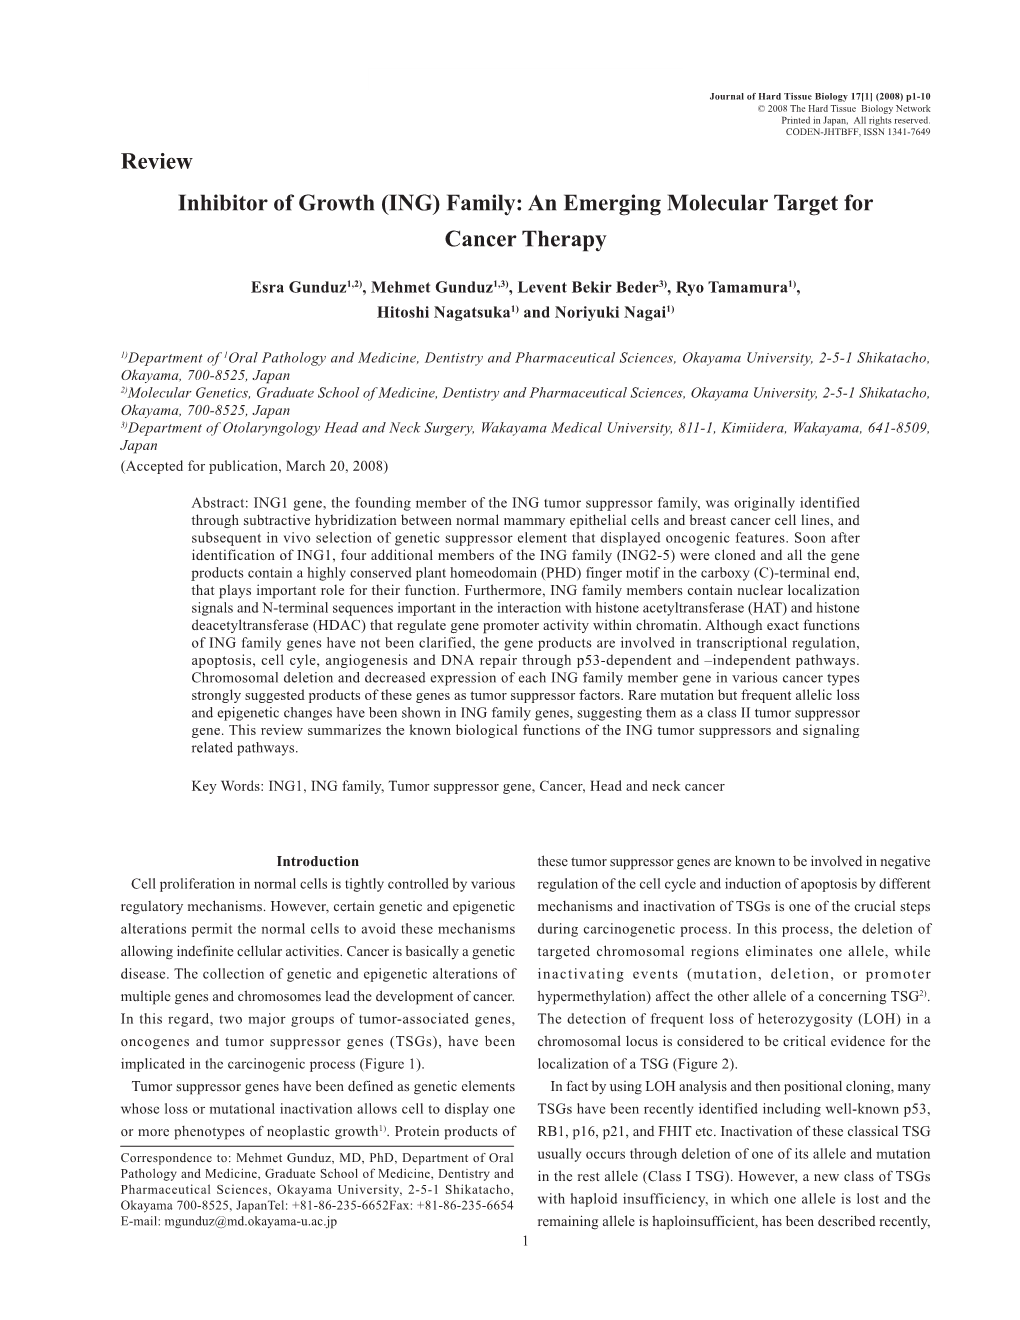 Inhibitor of Growth (ING) Family: an Emerging Molecular Target for Cancer Therapy